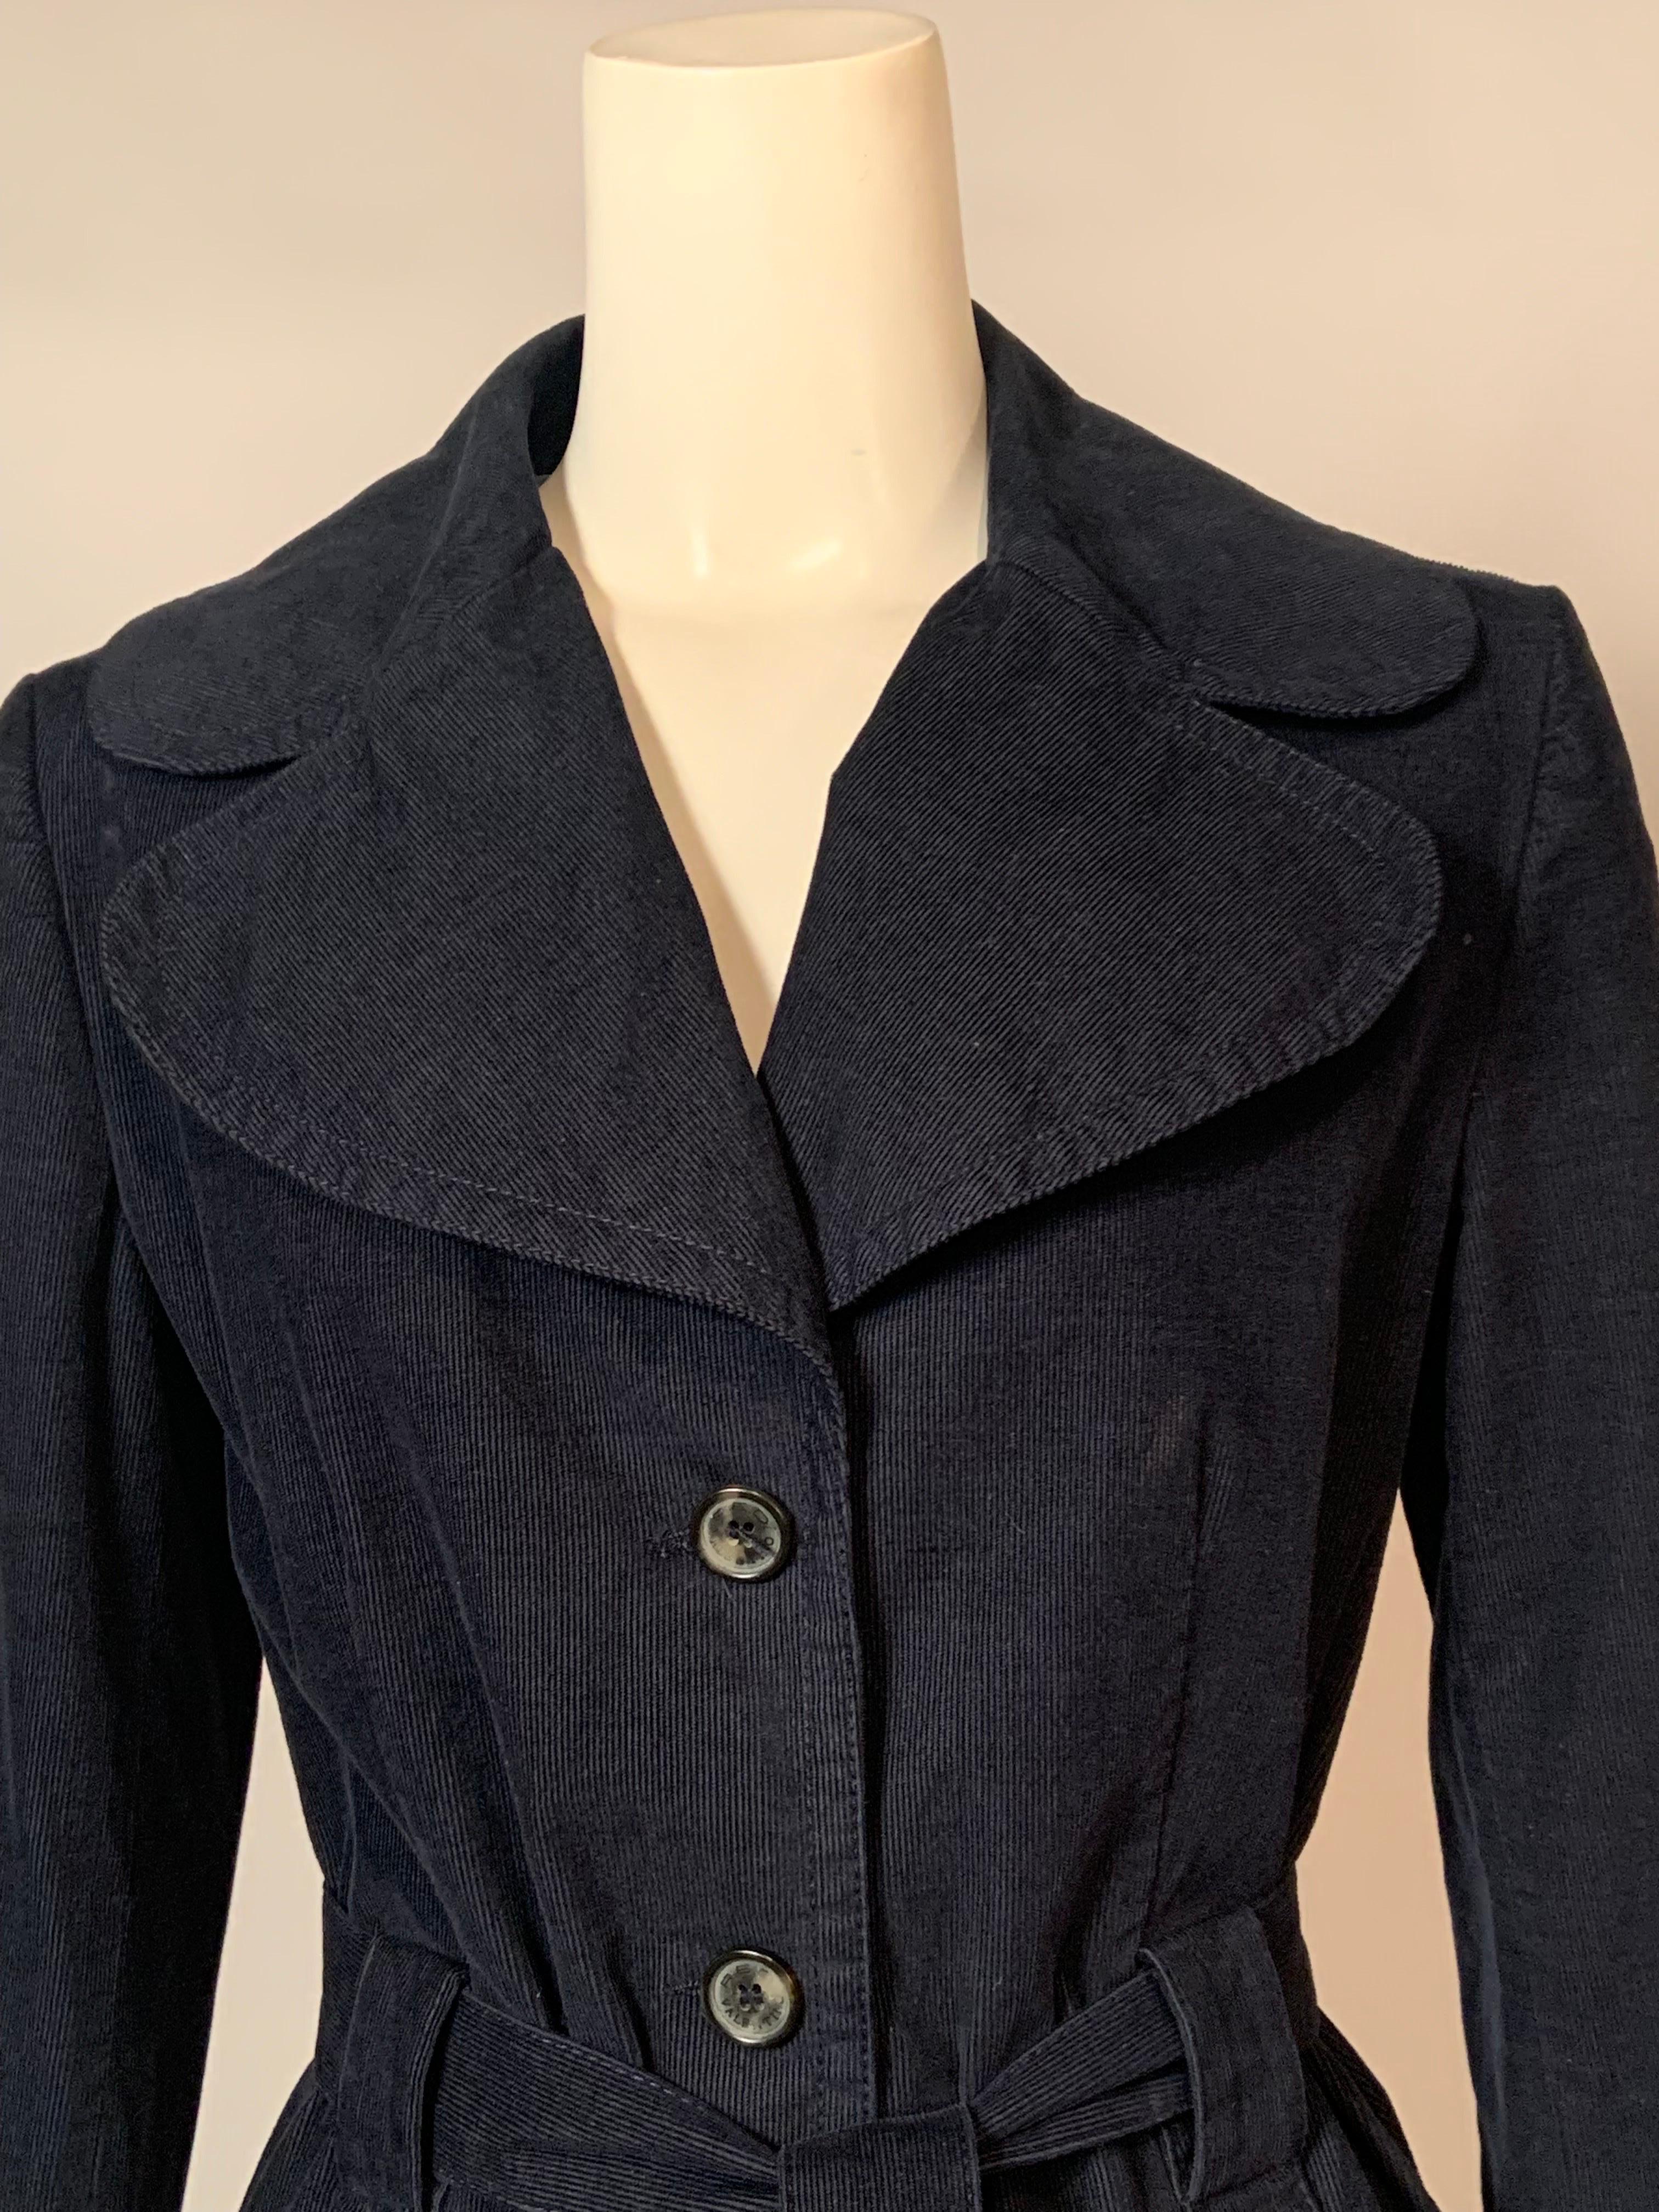 This stylish jacket from R.E.D. Valentino is made from navy blue corduroy with a notched lapel, three button front, and a tie belt.  The patch pockets snap closed with a decorative silver tone V logo.  The jacket is fully lined in light blue